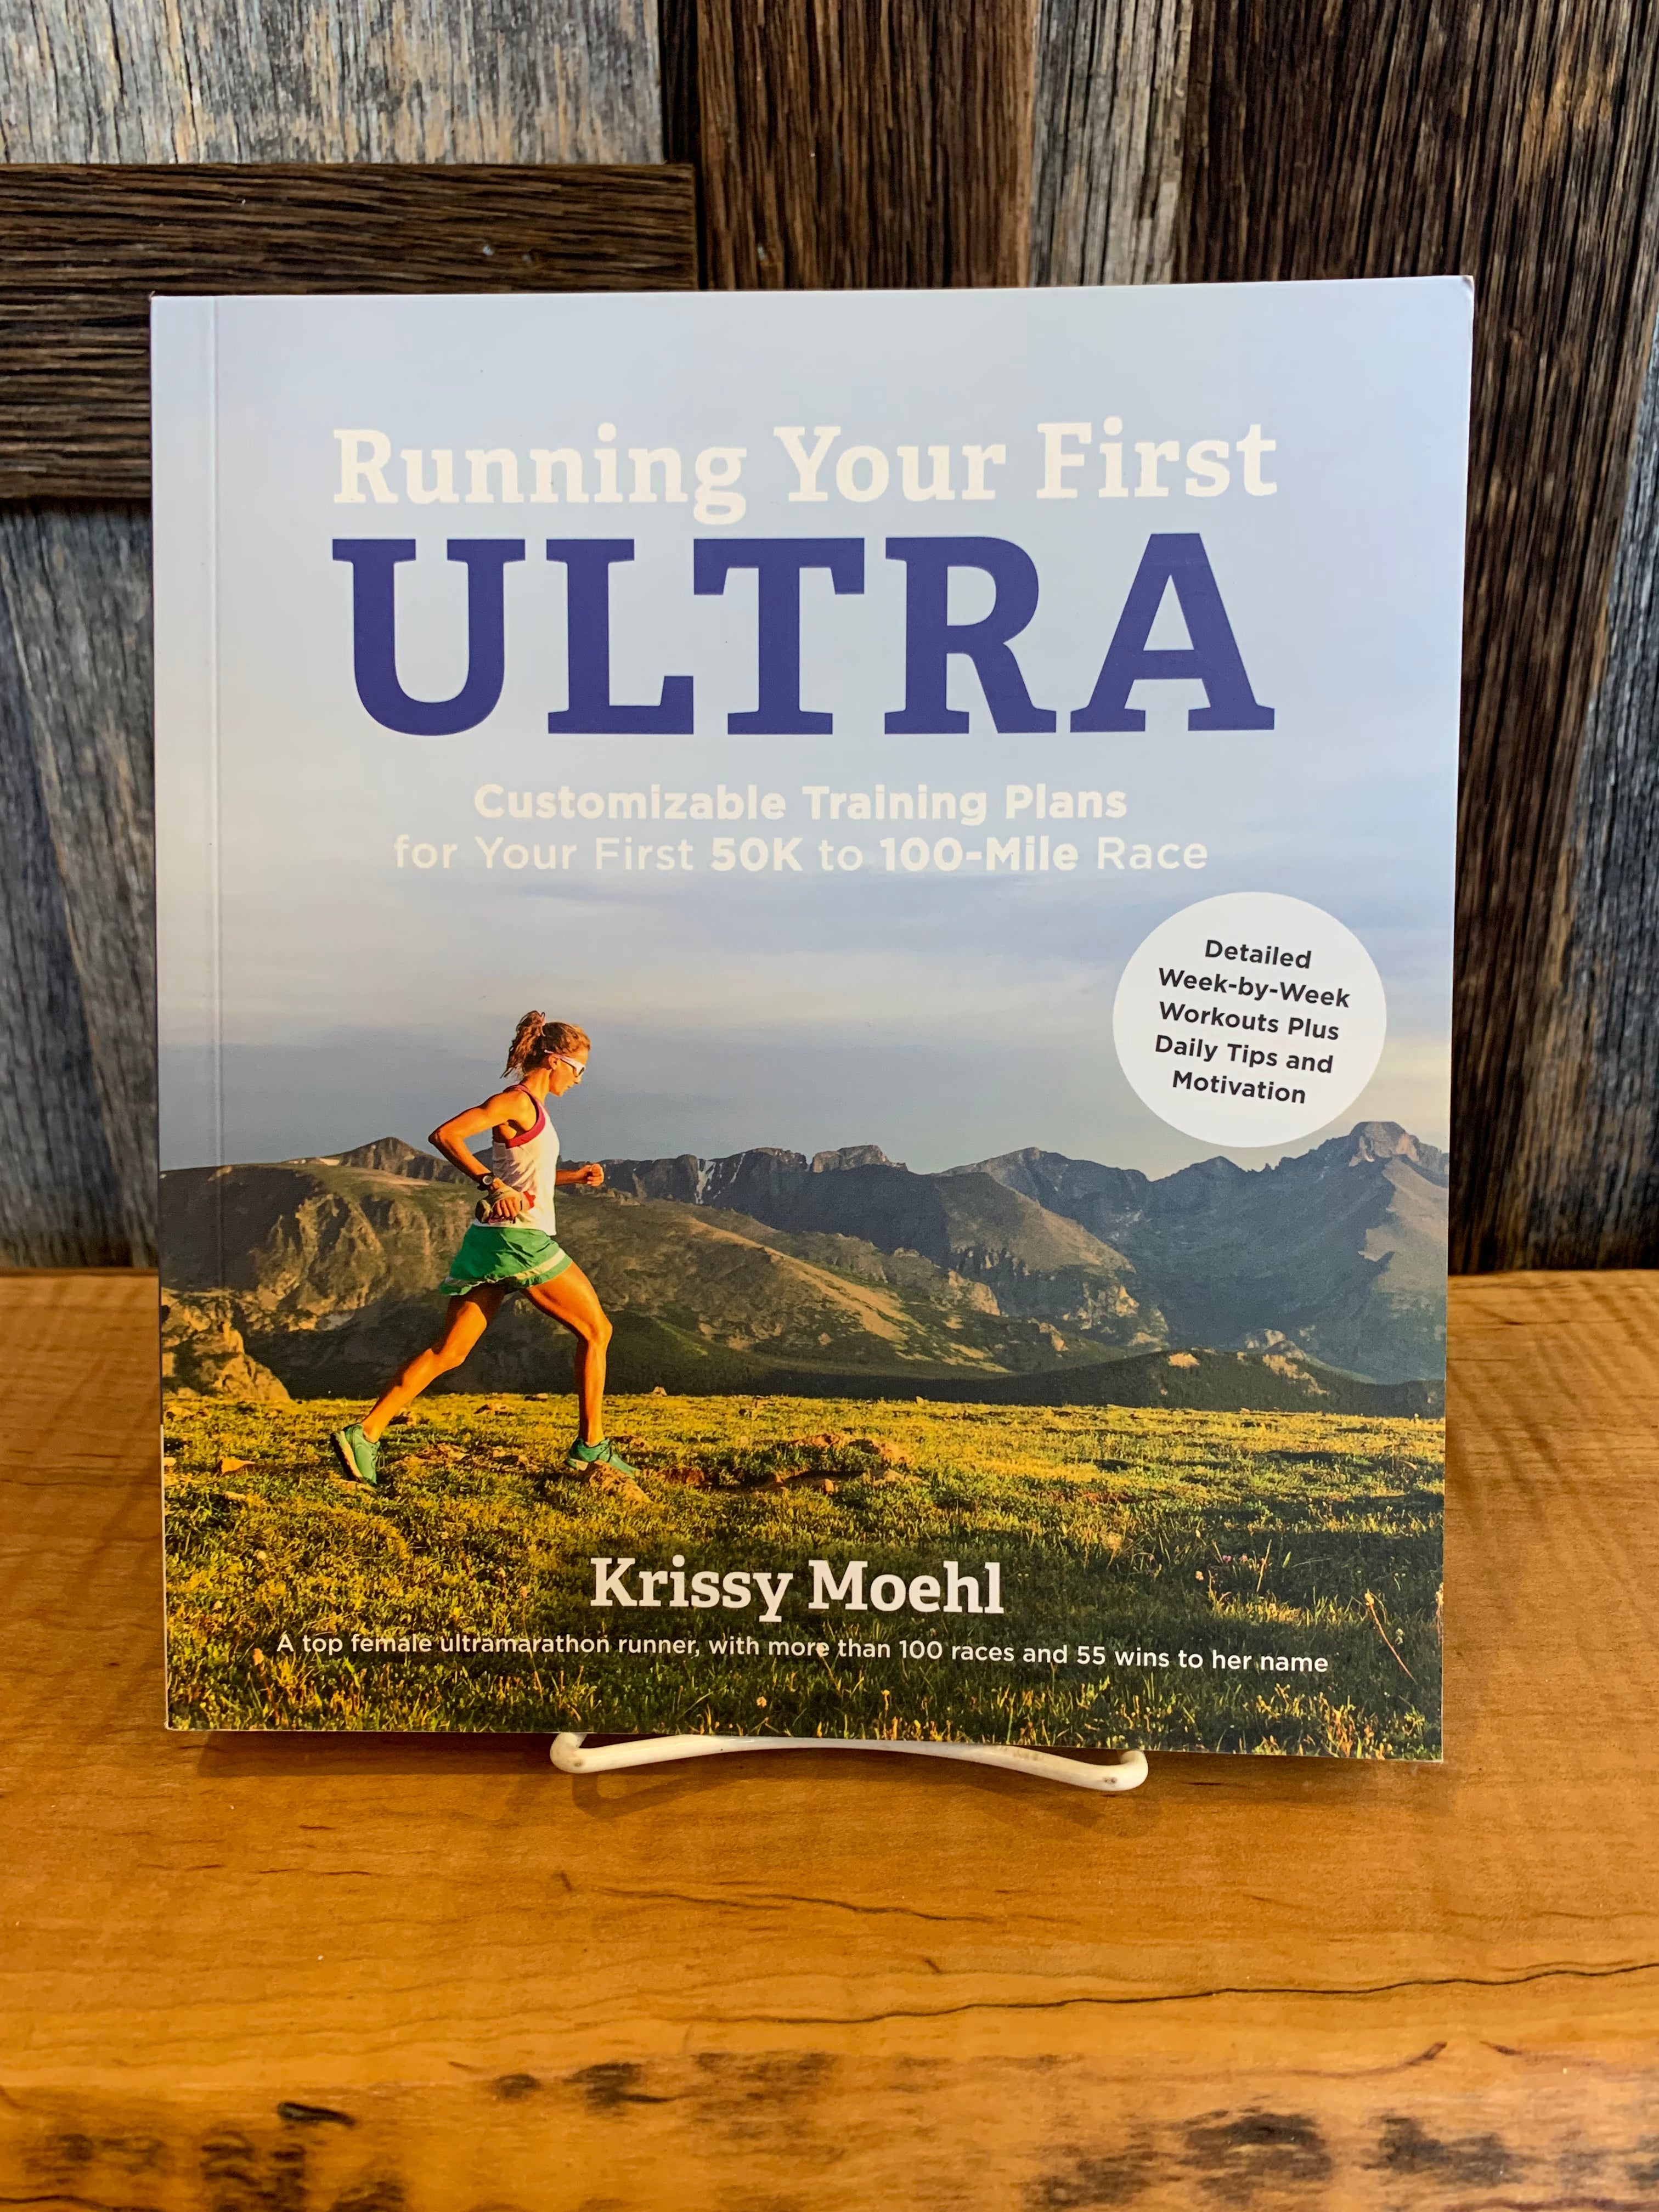 Krissy Moehl: Running Your First Ultra: Customizable Training Plans for Your First 50K to 100-mile Race